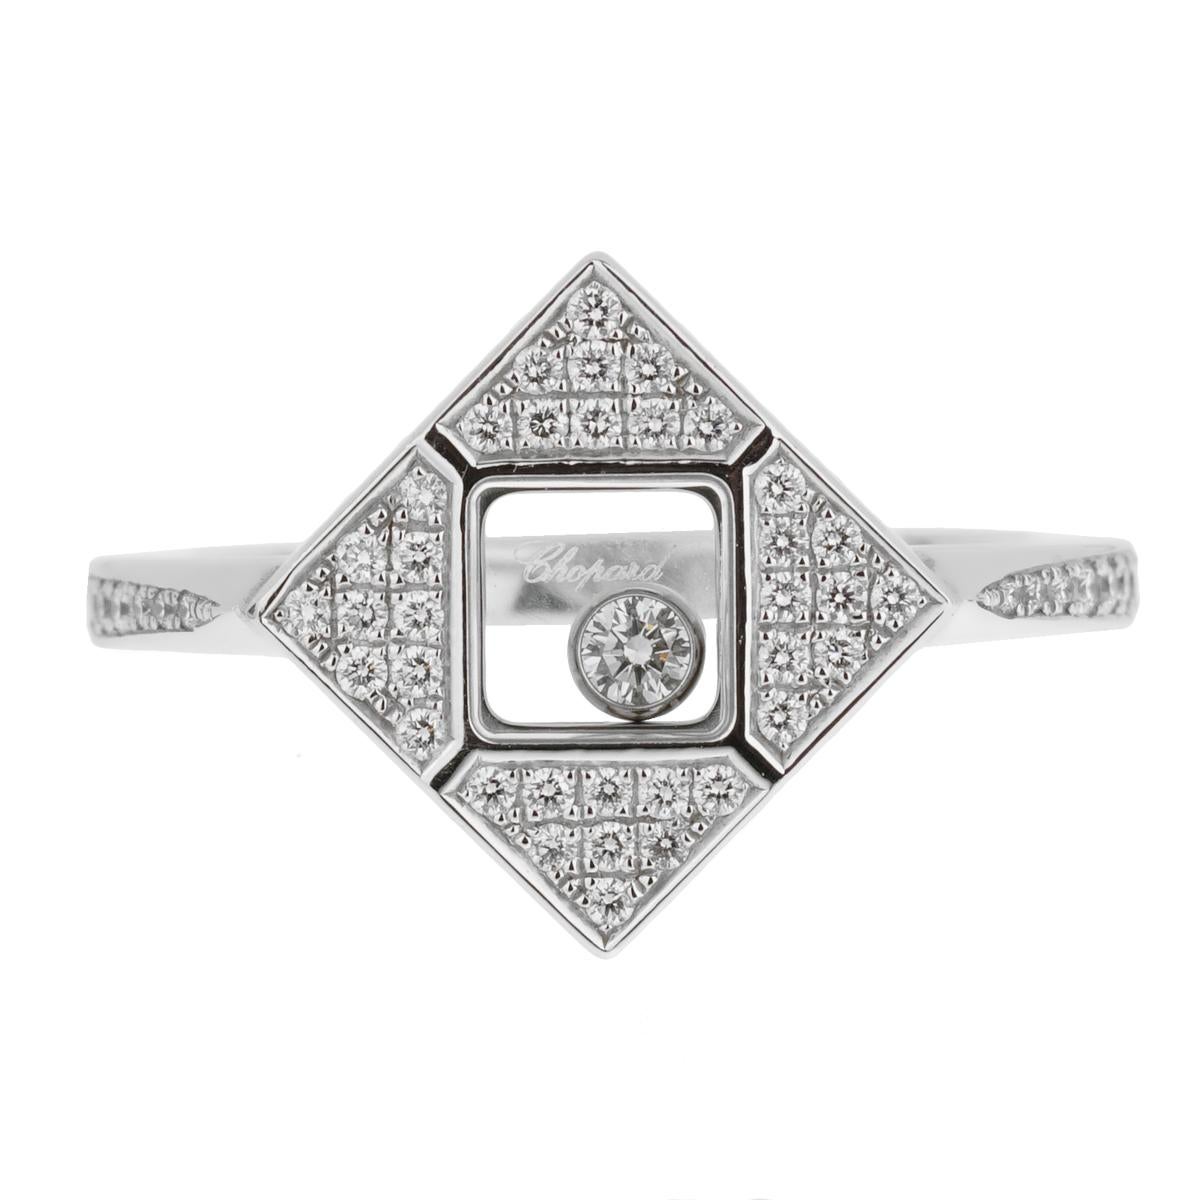 A chic Chopard diamond ring from the Happy Diamonds collection featuring a 54 round brilliant cut diamonds surrounding a floating diamond in 18k white gold.

Size: 5 1/2
Sku: 1725